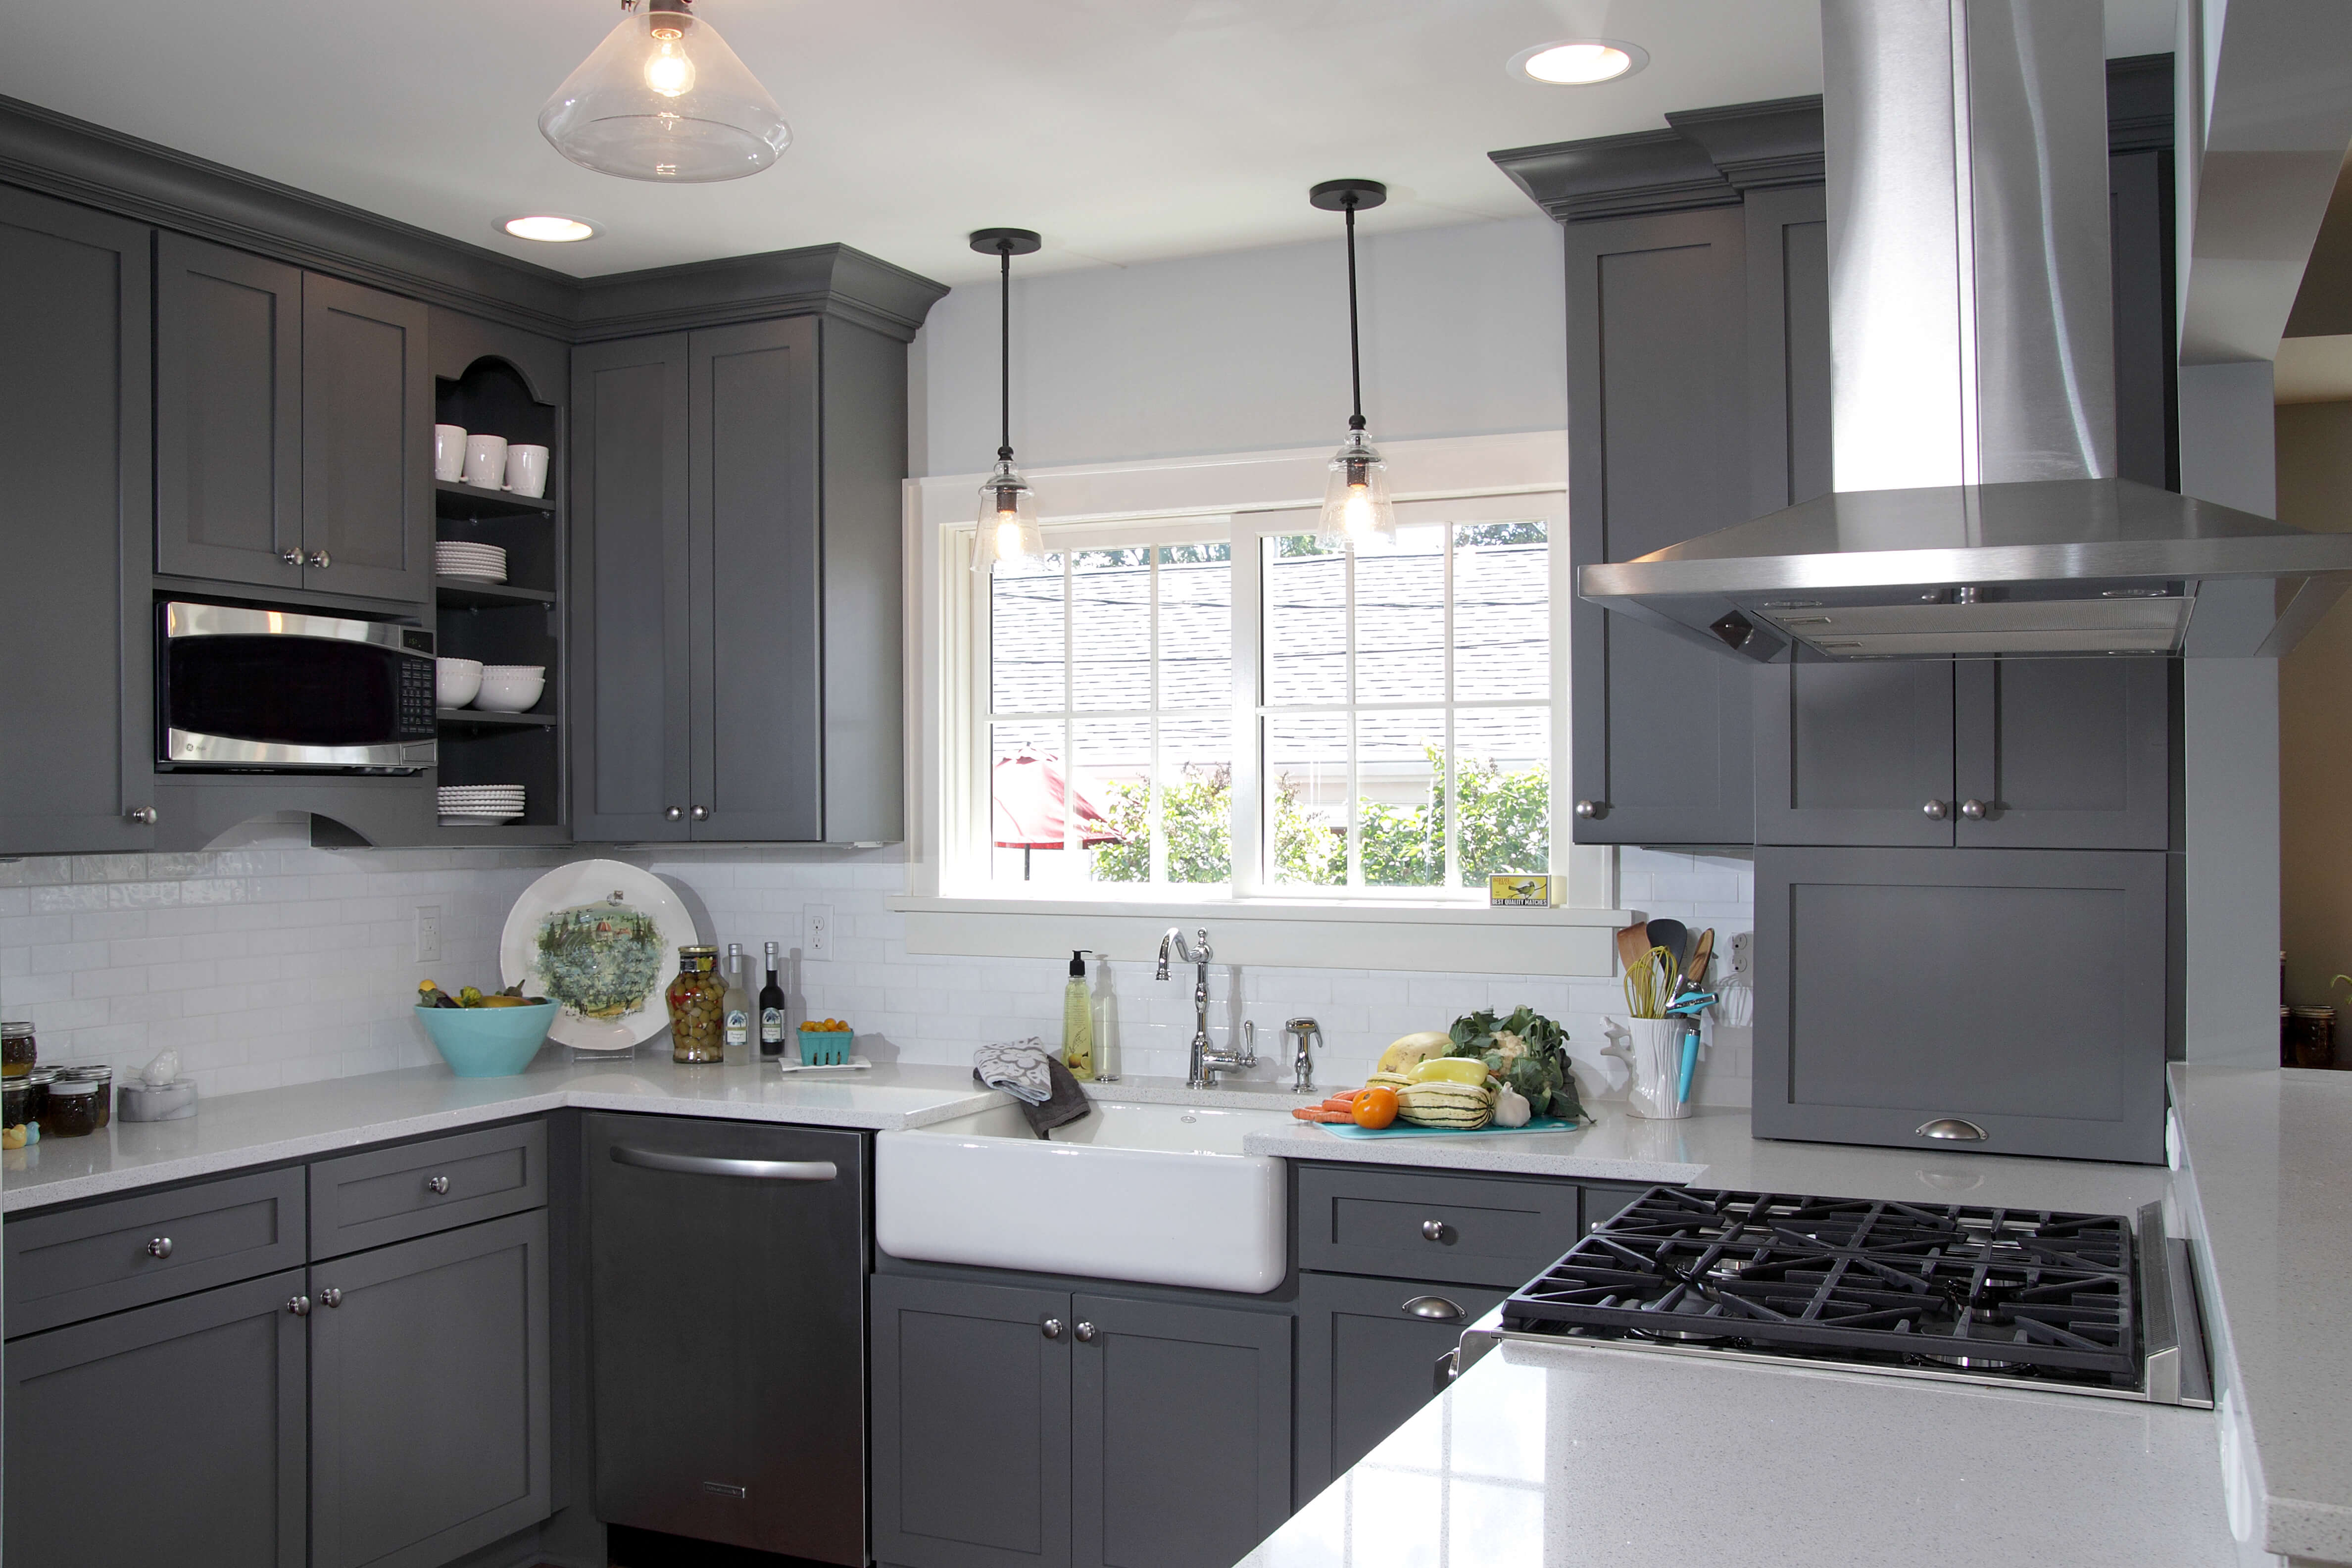 A dark gray and white kitchen with storm gray painted kitchne cabinets from Dura Supreme Cabinetry.